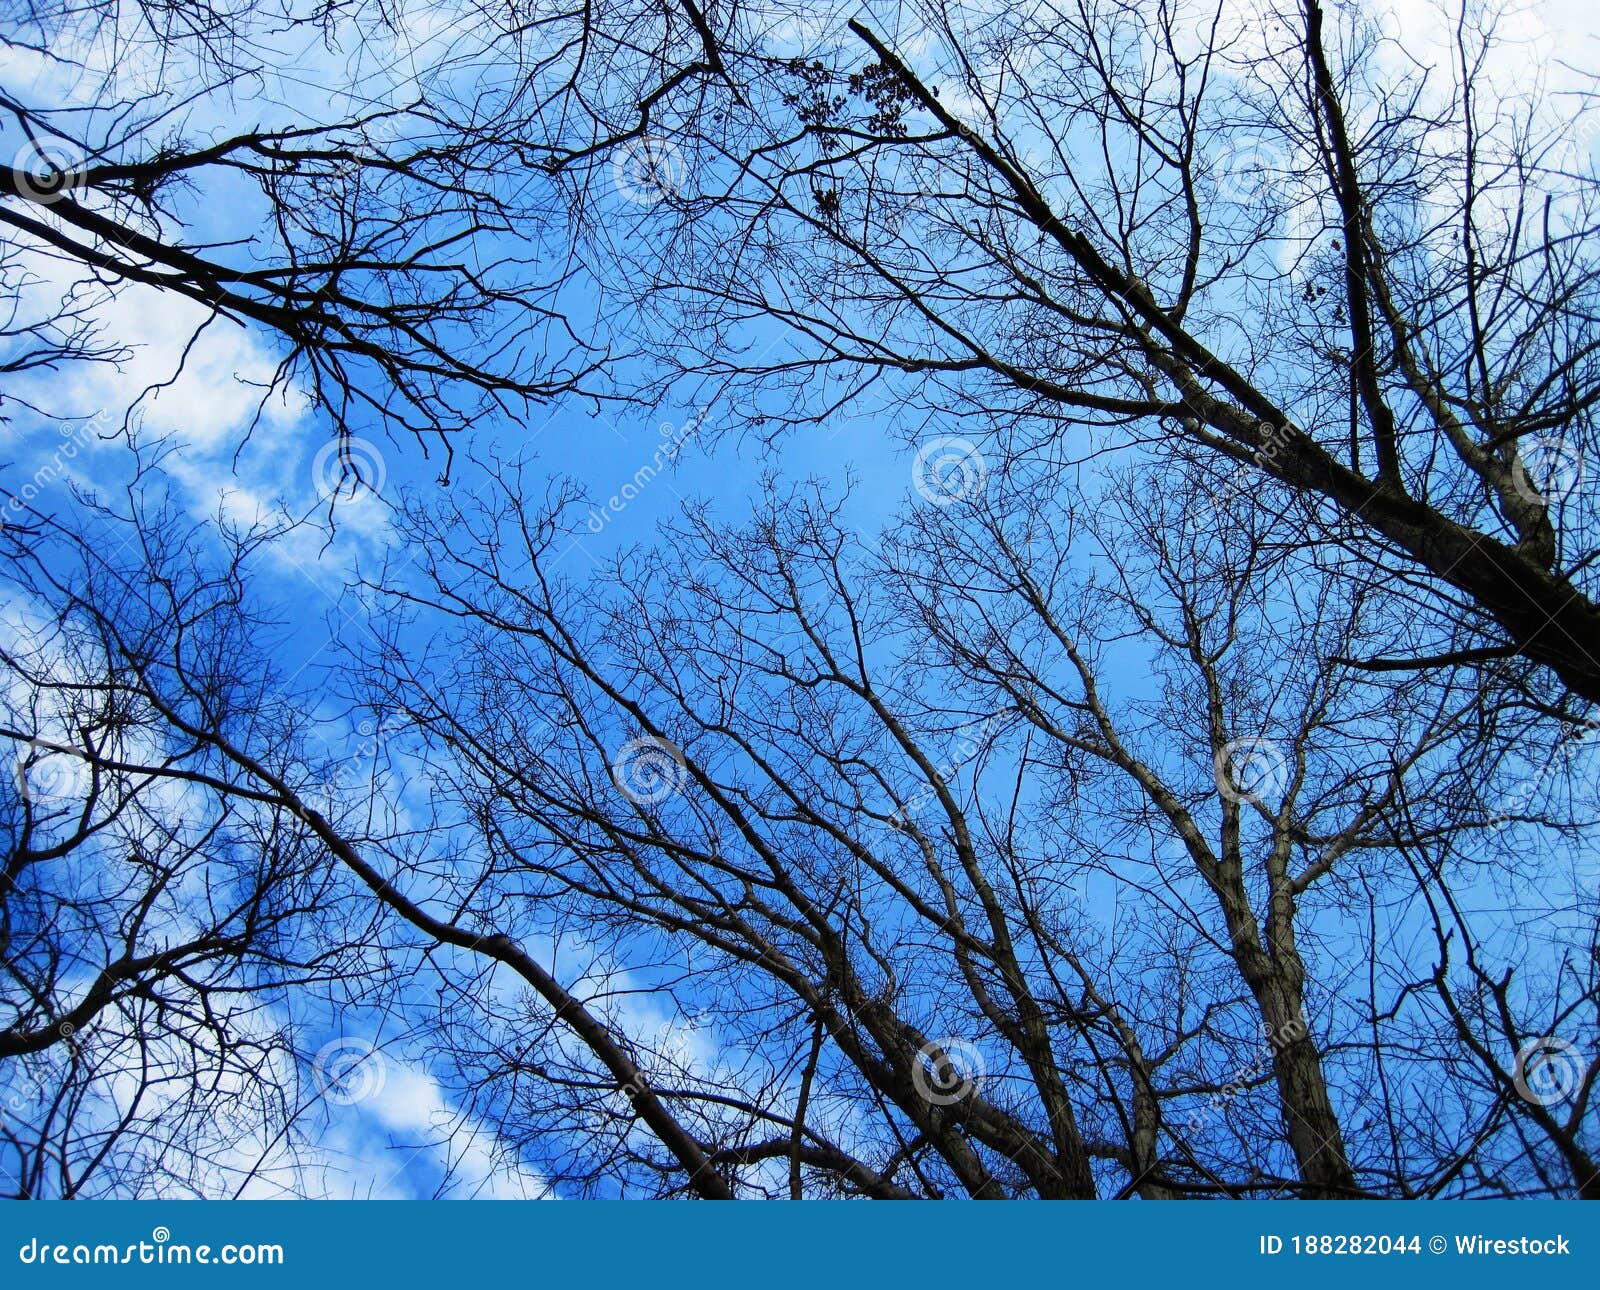 Low Angle Shot of Bare Trees in the Forest with a Blue Sky in the ...